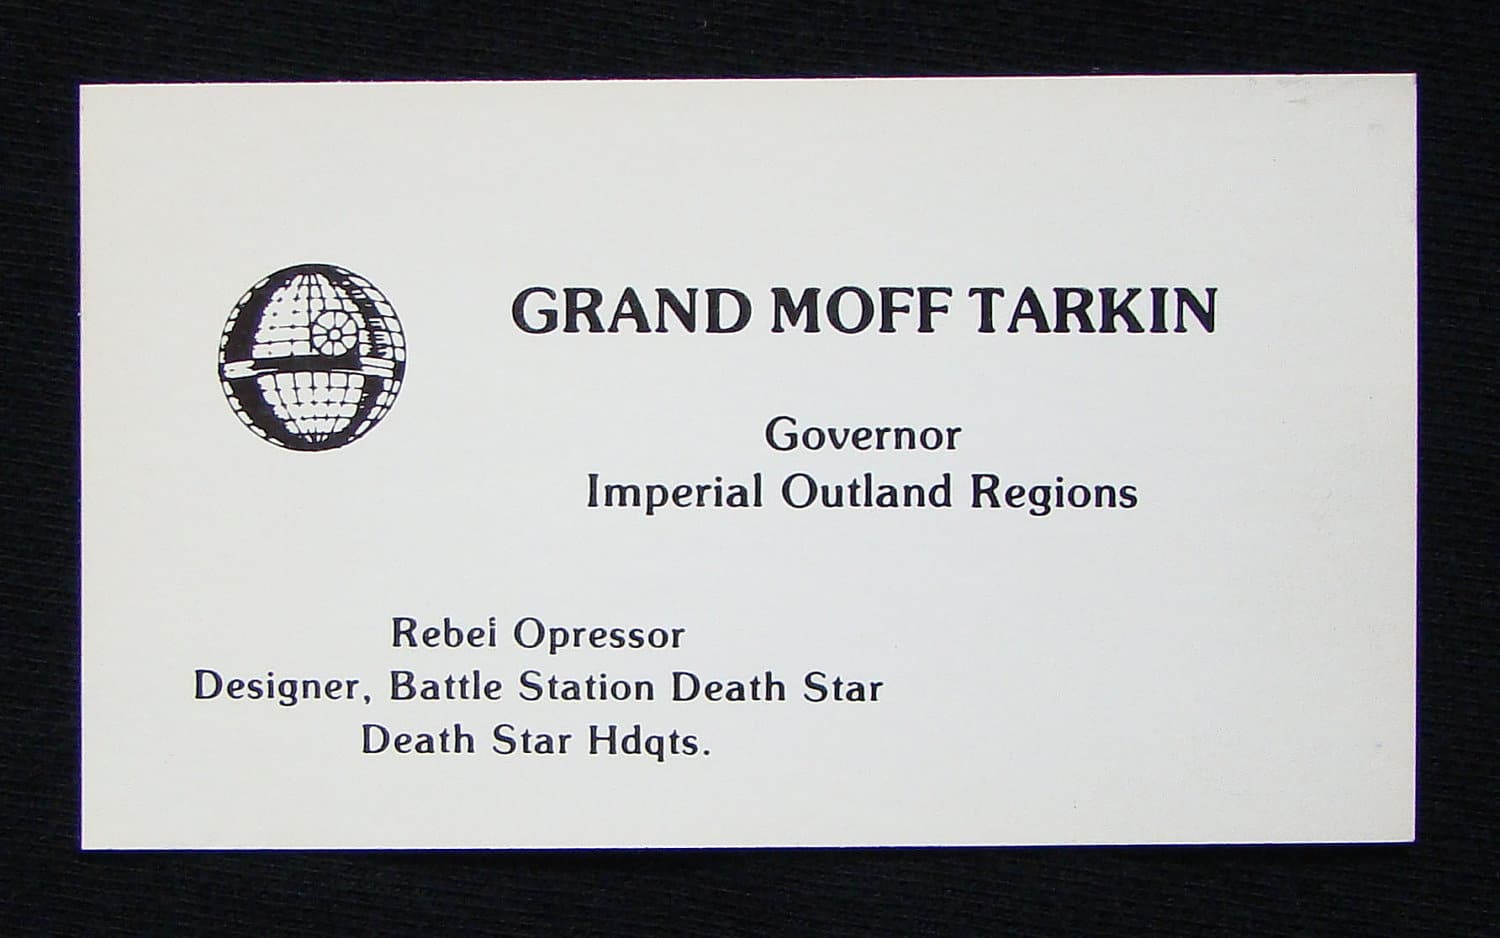 star-wars-characters-business-cards